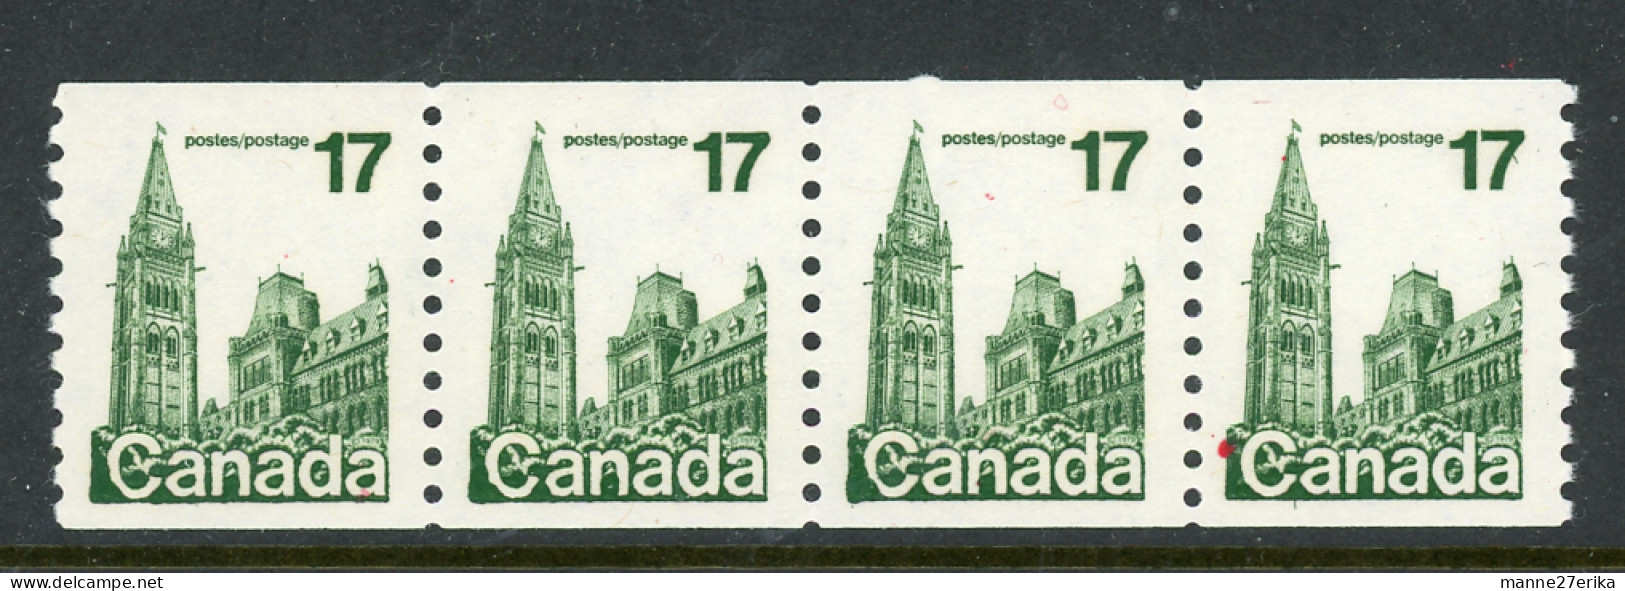 -Canada-1979- MNH (**) Definitive Coil Stamps "House Of Parliament" - Markenrollen